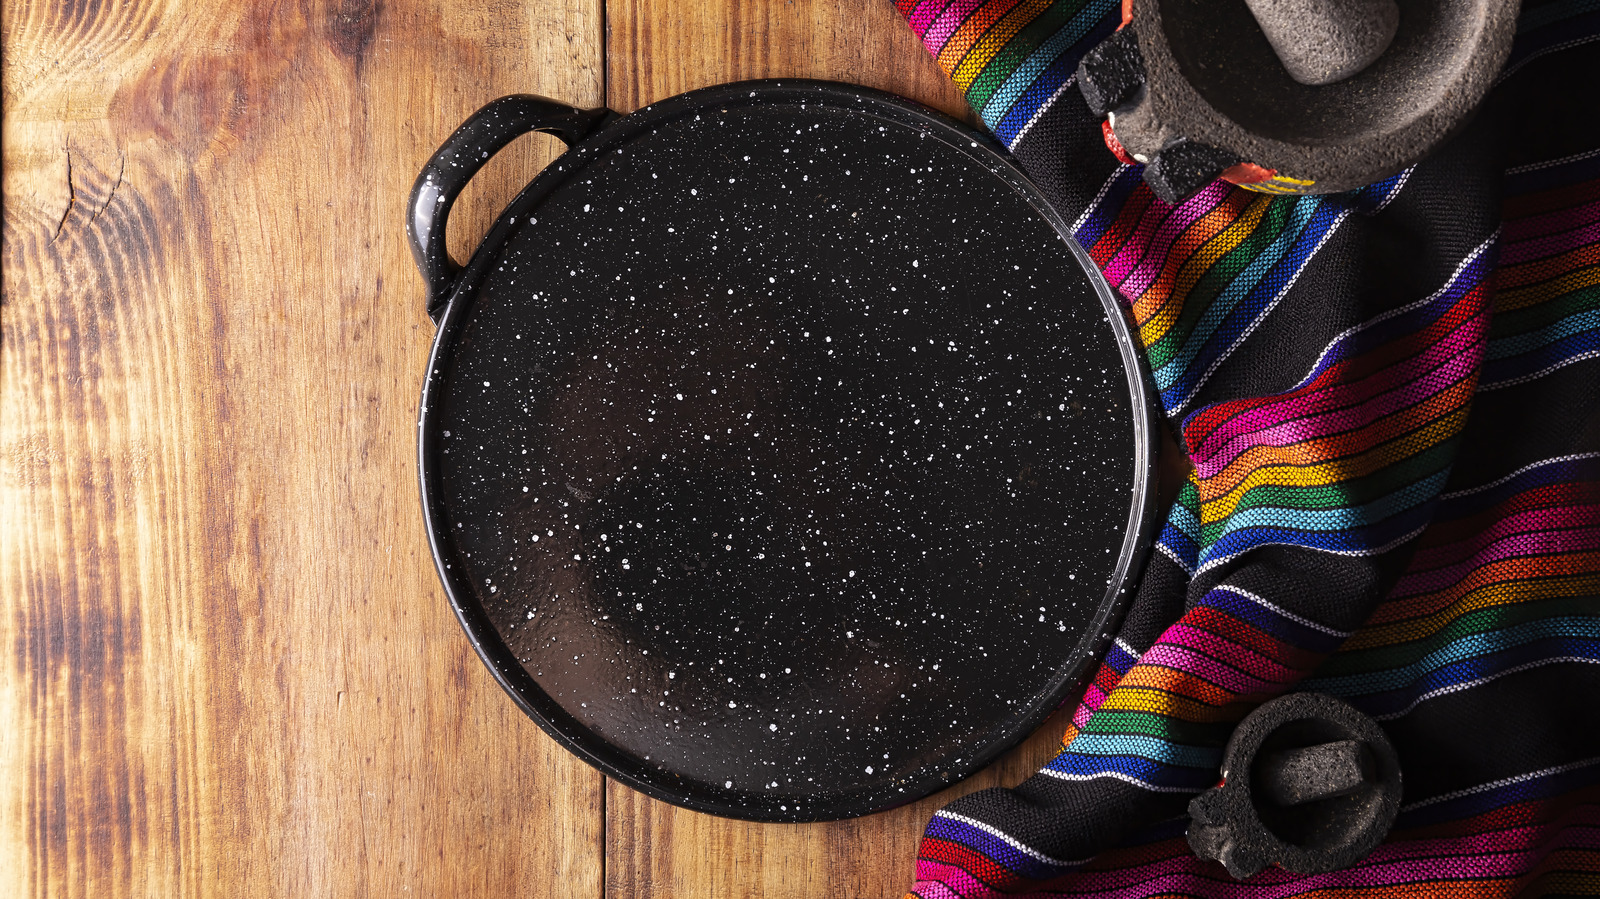 Mexican Comal, Skillets, Griddles and Burners